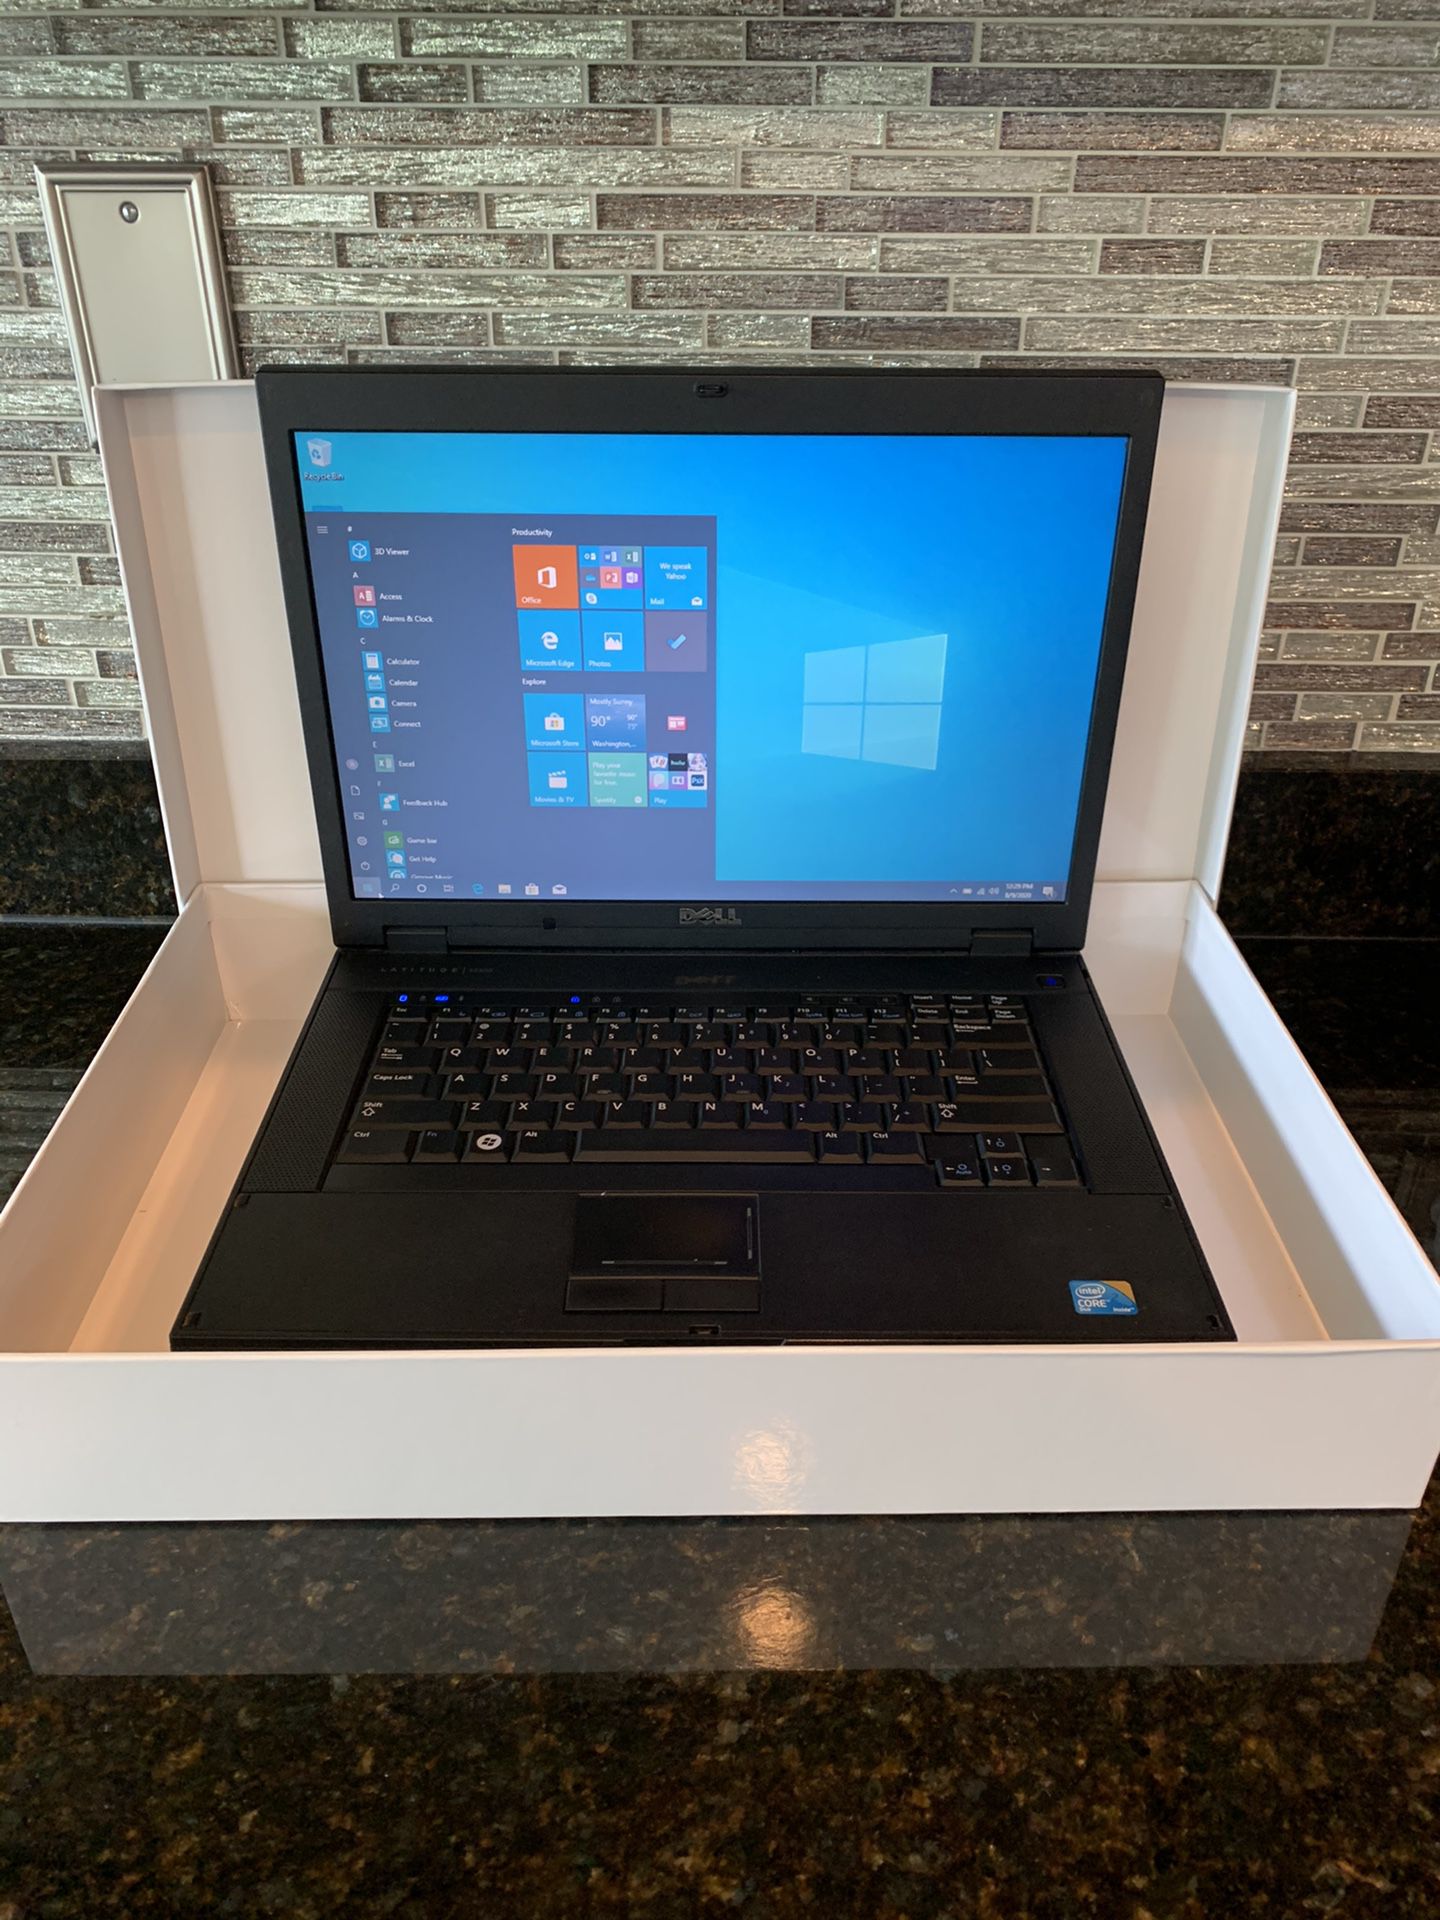 15” Dell Latitude E5500 Laptop with Windows 10 and Microsoft Office